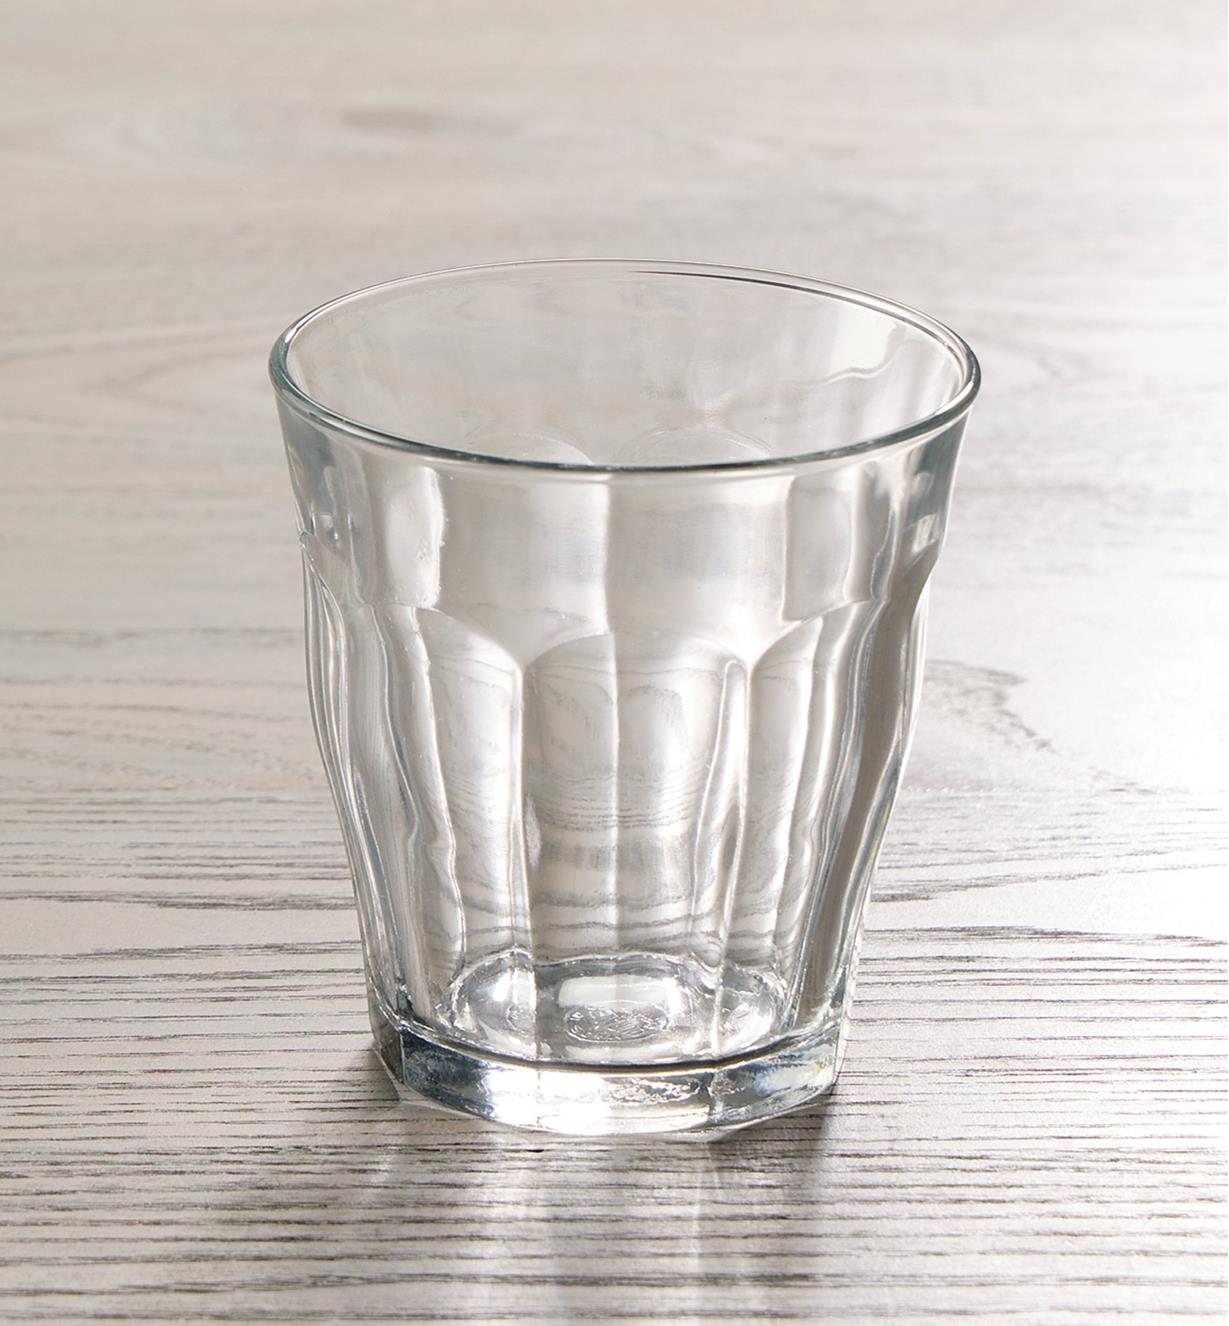 An empty 310ml Duralex Picardie glass placed on a wooden tabletop backlit to show the fluted design